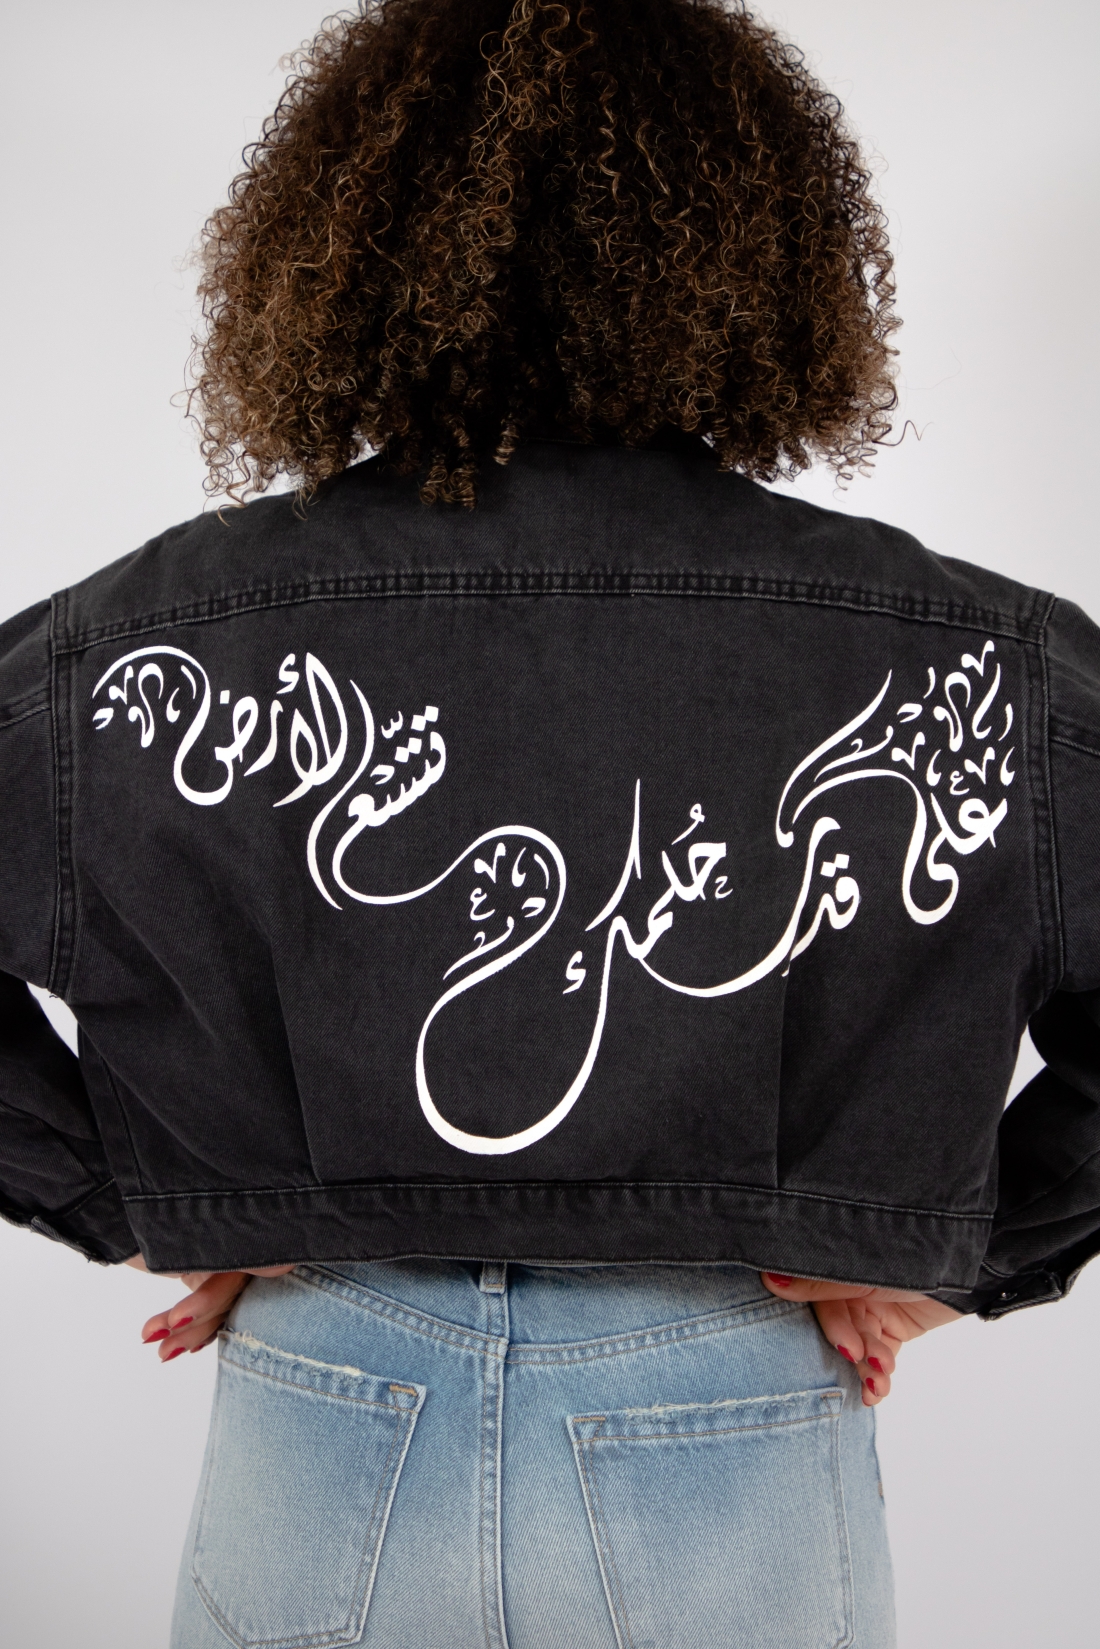 Exclusive denim jacket in black wash with hand-painted Arabic Calligraphy